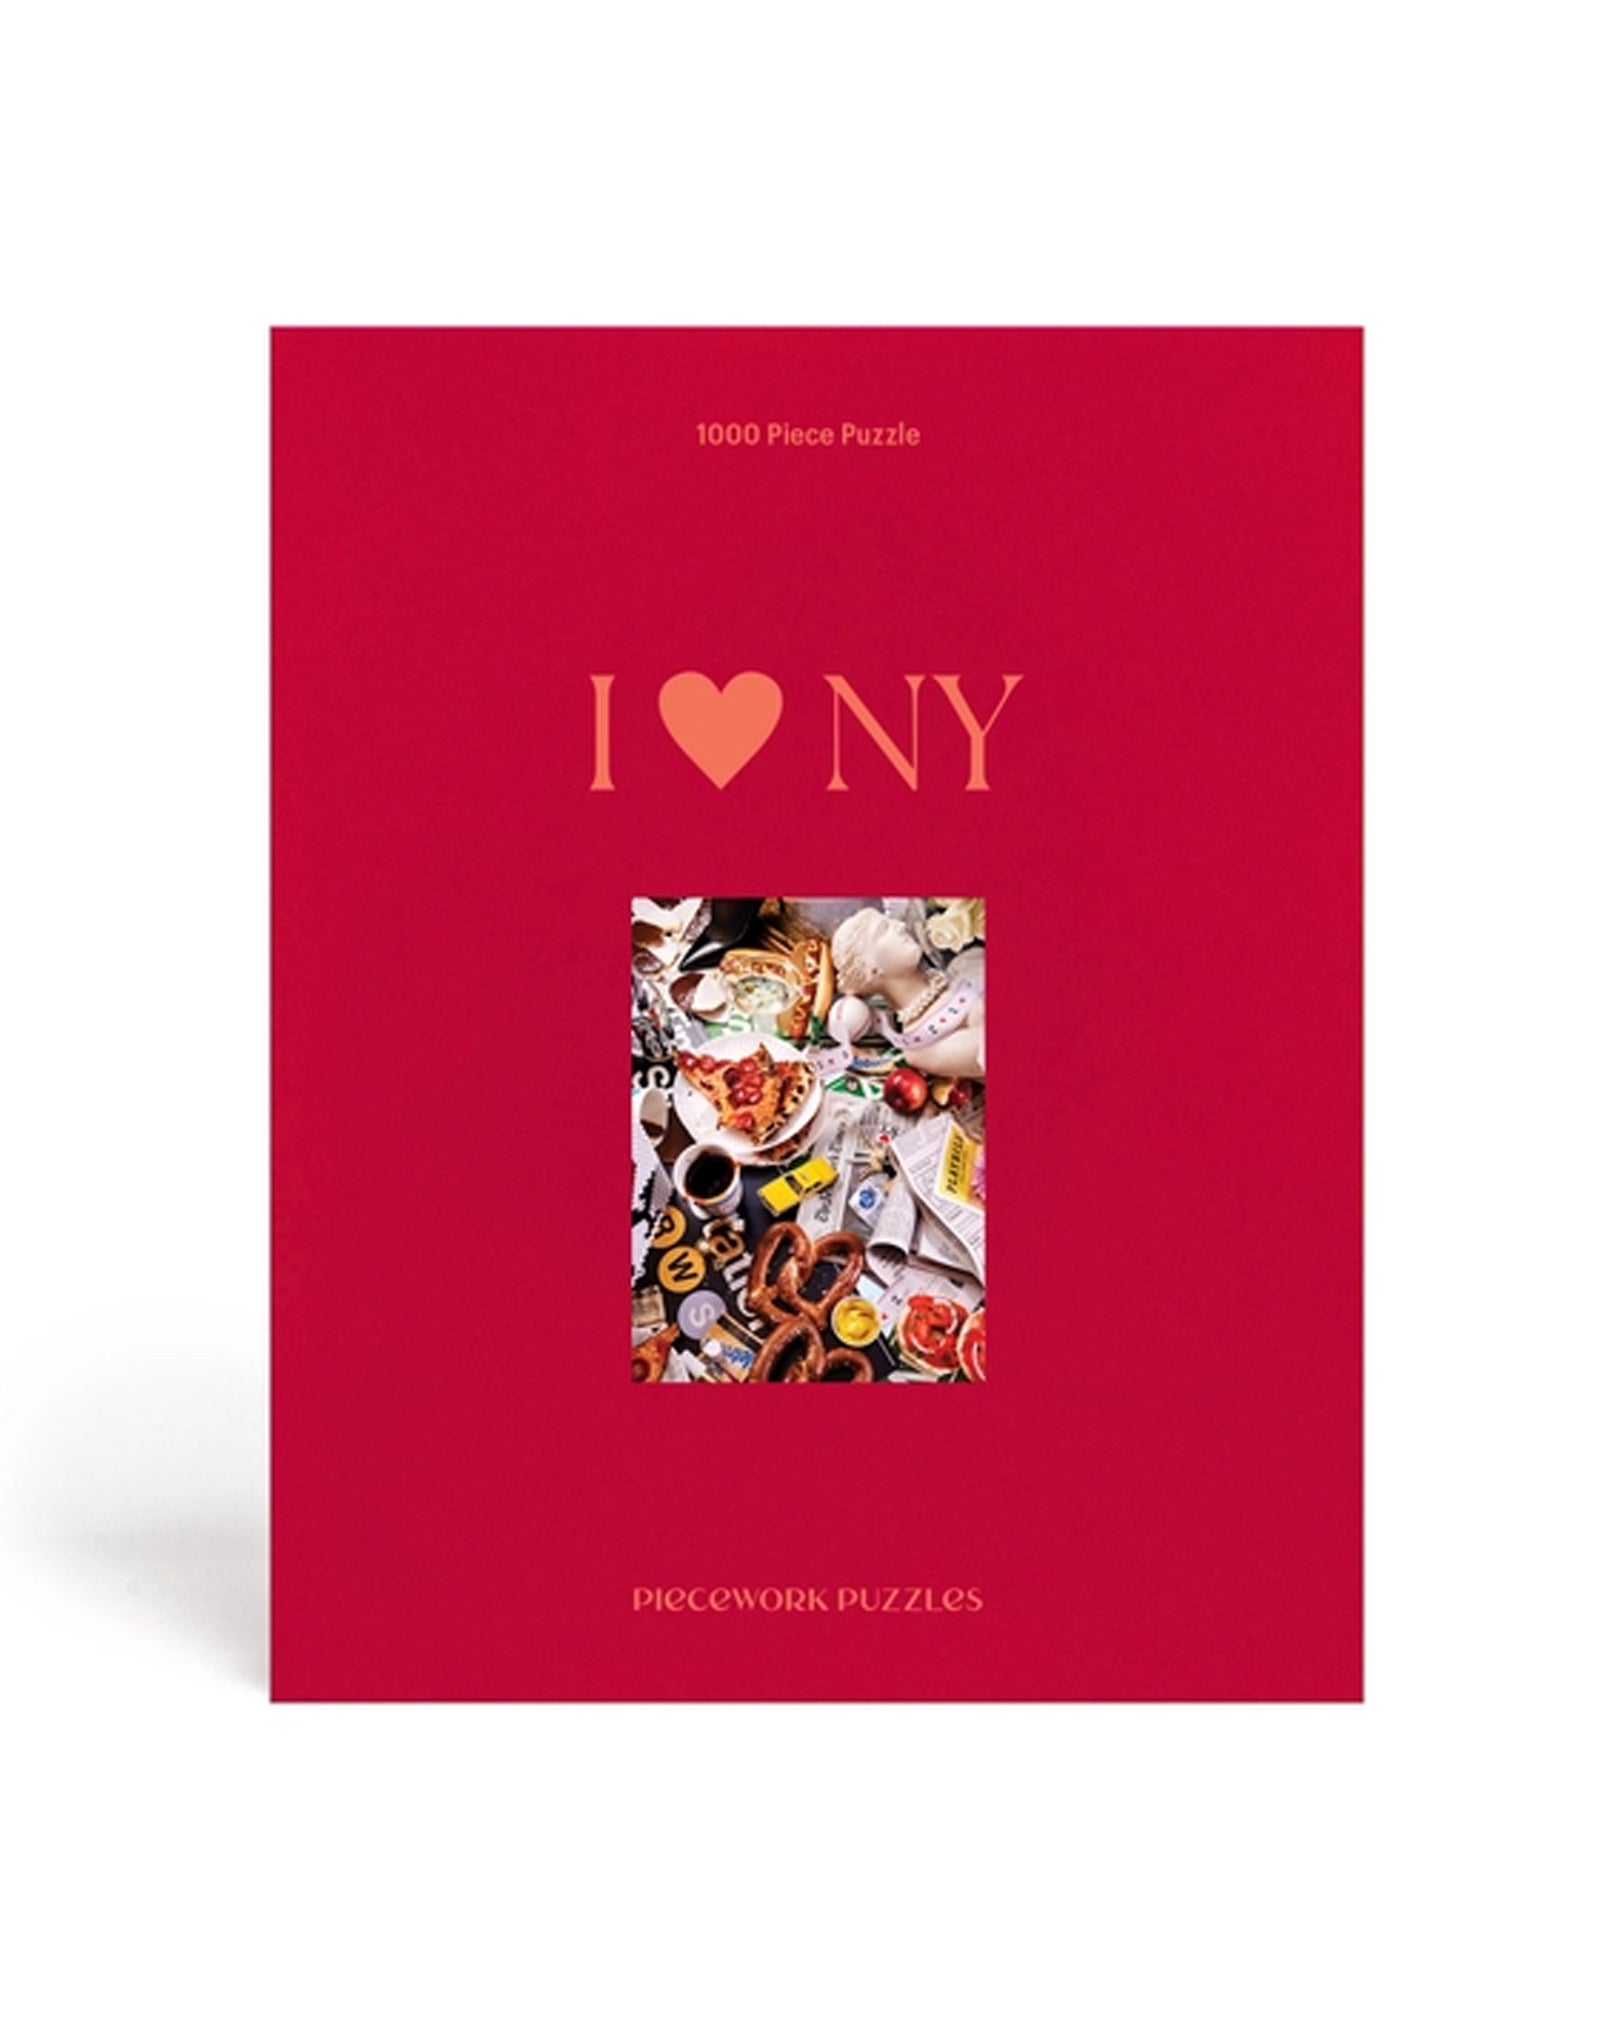 PIECEWORK 1000 Piece Puzzle in I <3 NY available at Lahn.shop